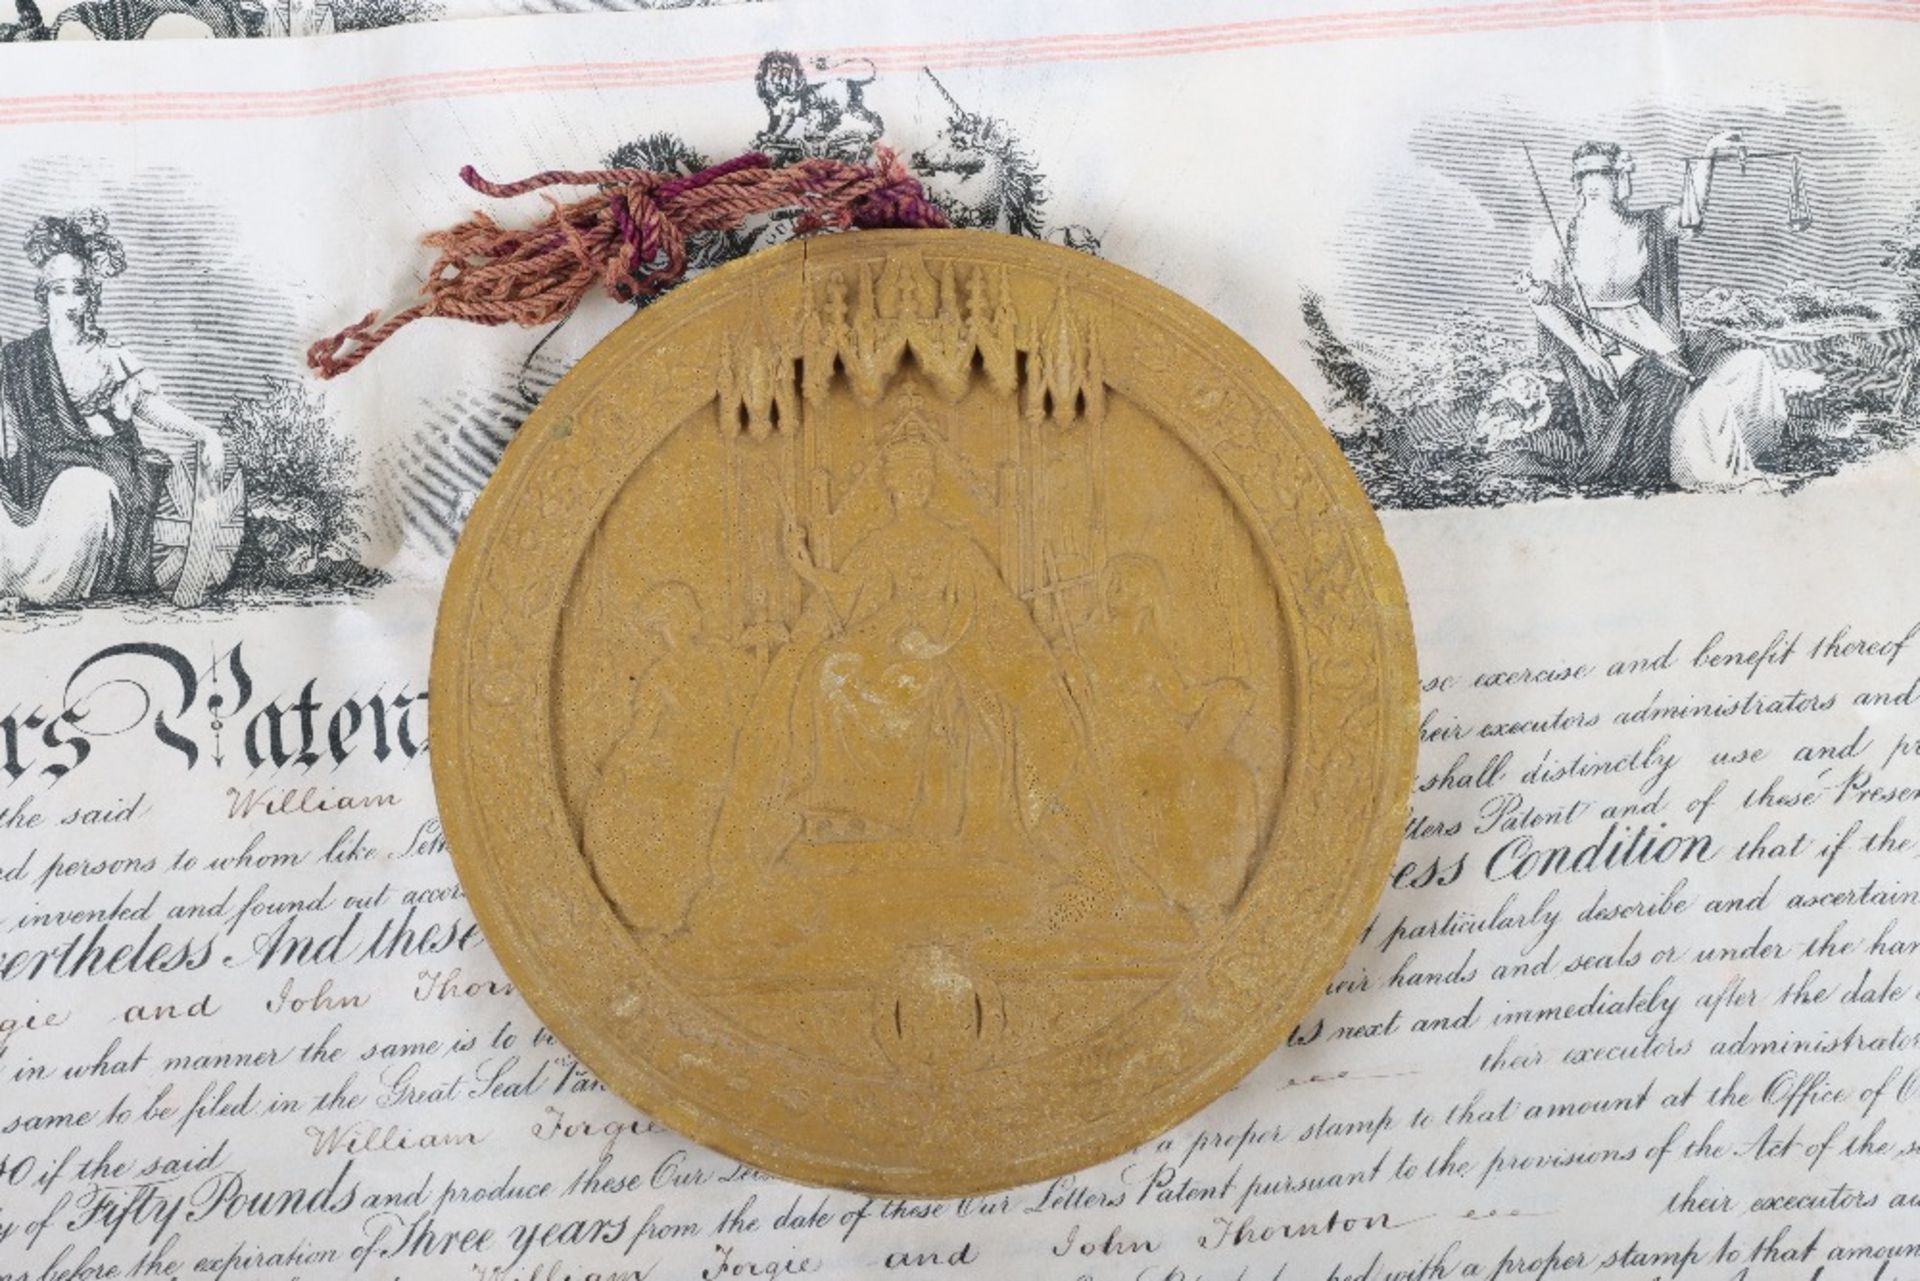 A Victorian wax seal and velum indenture and patent relating to pre RNLI (Royal Naval Lifeboat Insti - Image 2 of 8